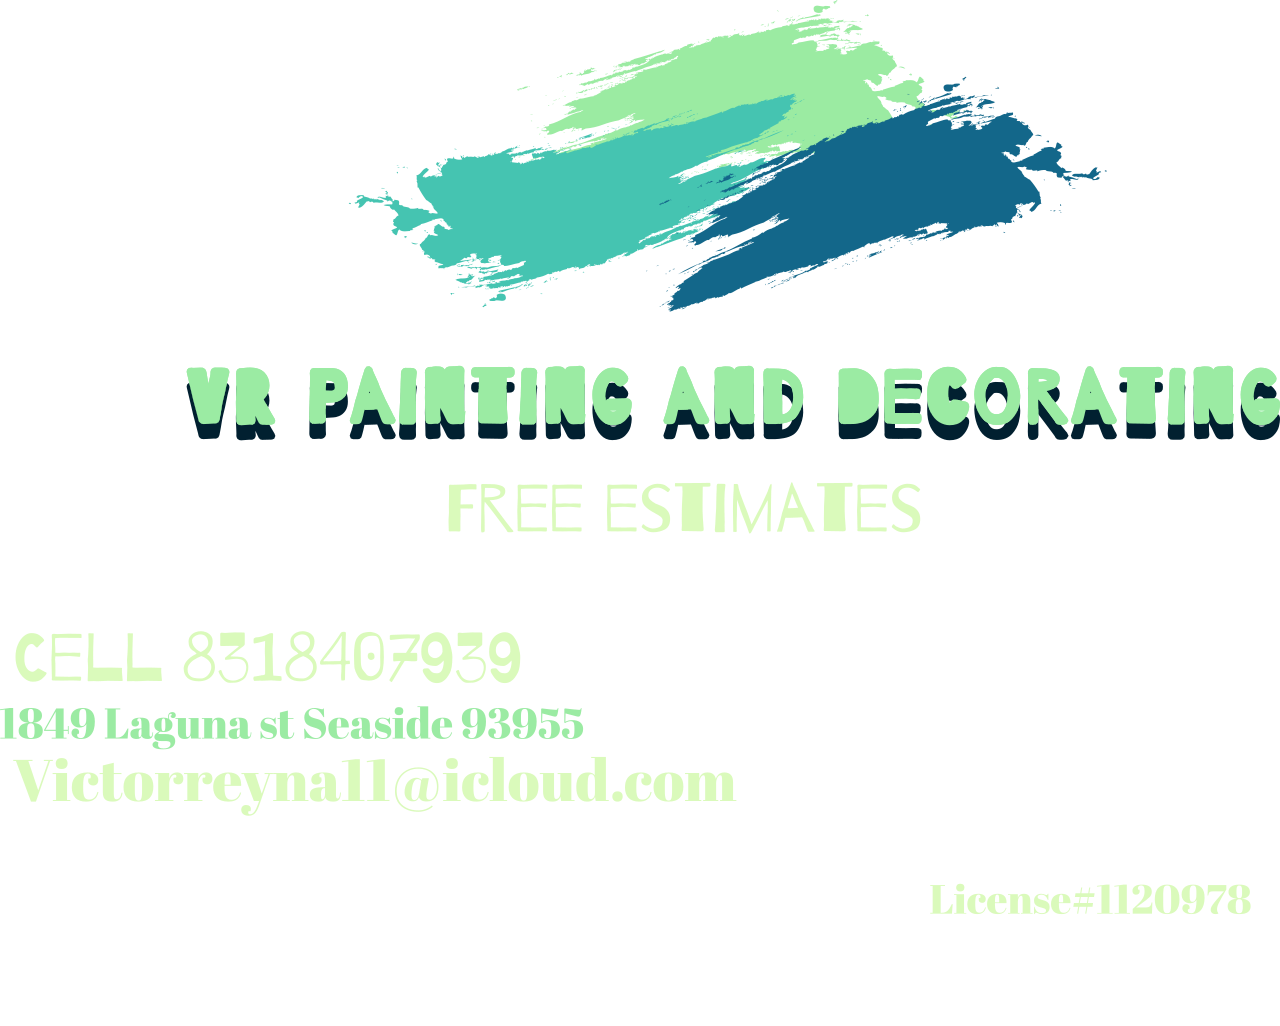 VR Painting and Decorating 's logo